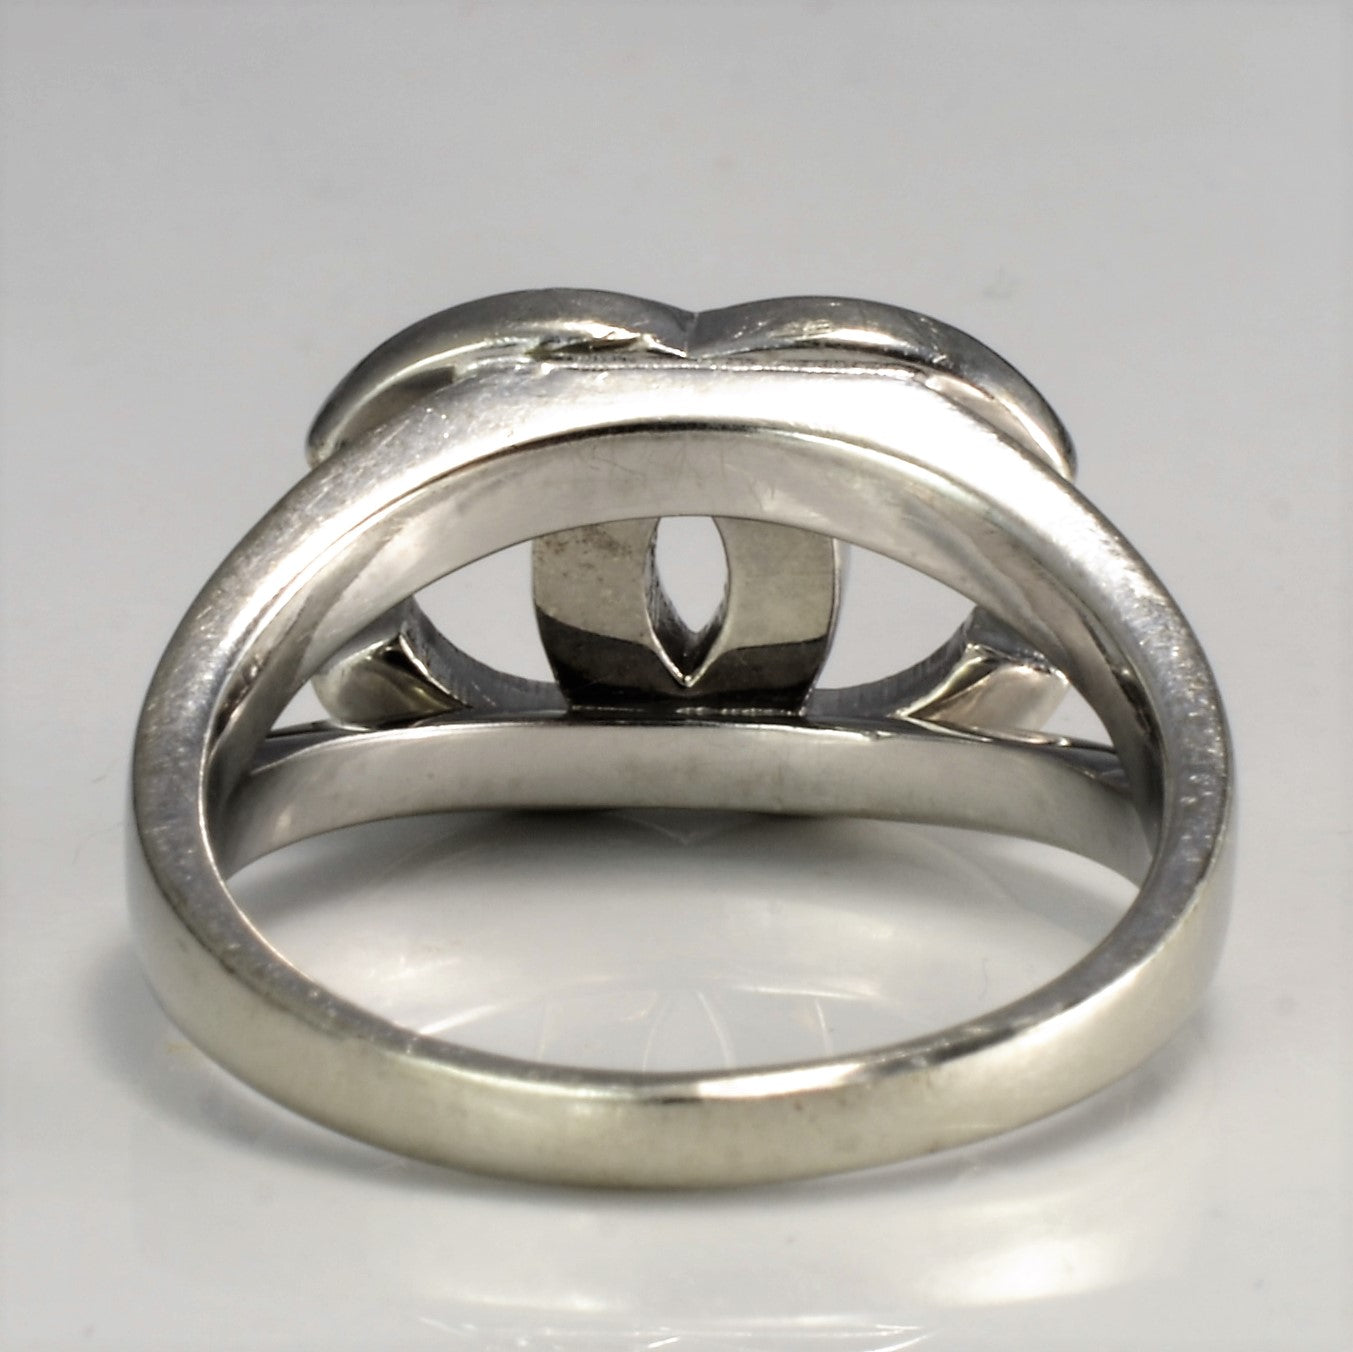 Chanel Inspired Ring | 0.28 ctw, SZ 7.25 |